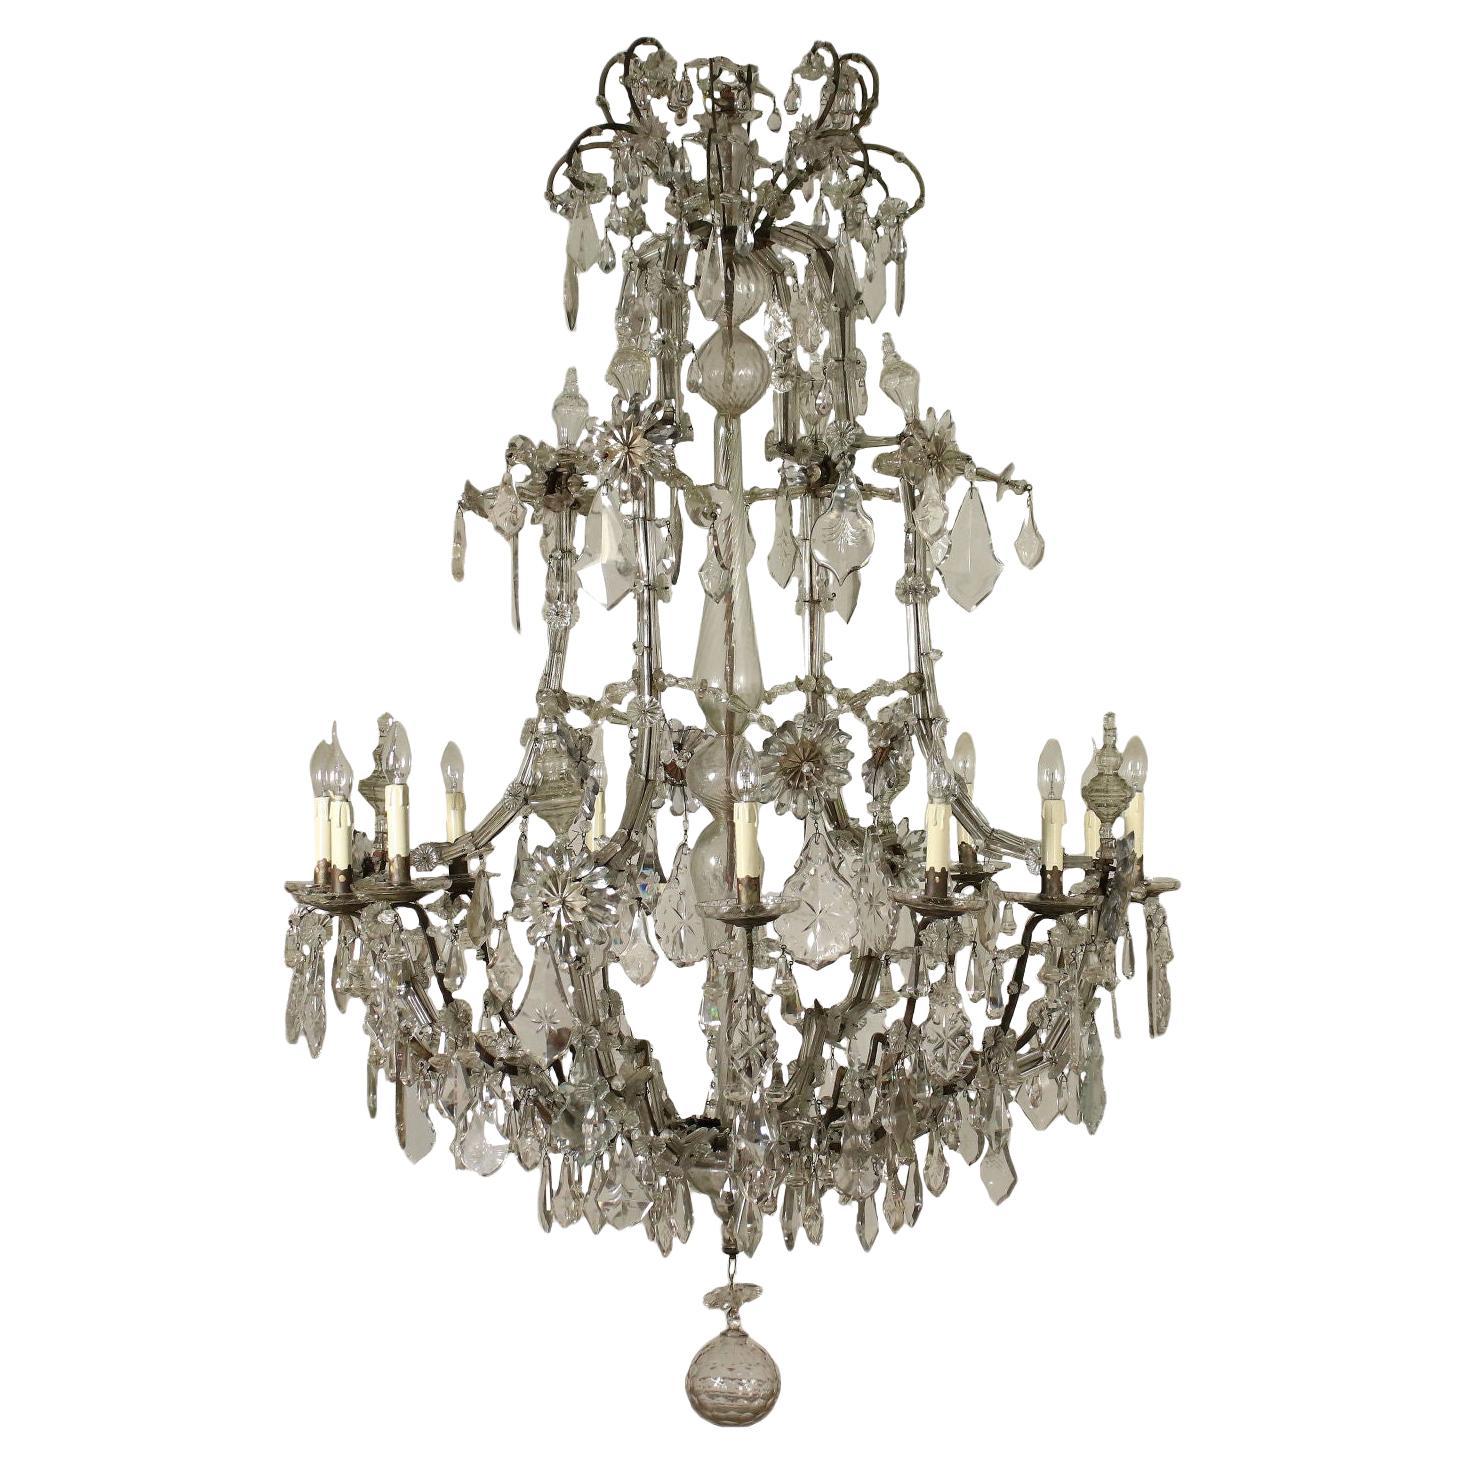 Chandelier Maria Theresa Iron Bronze Glass, Italy, Late 18th Century For Sale